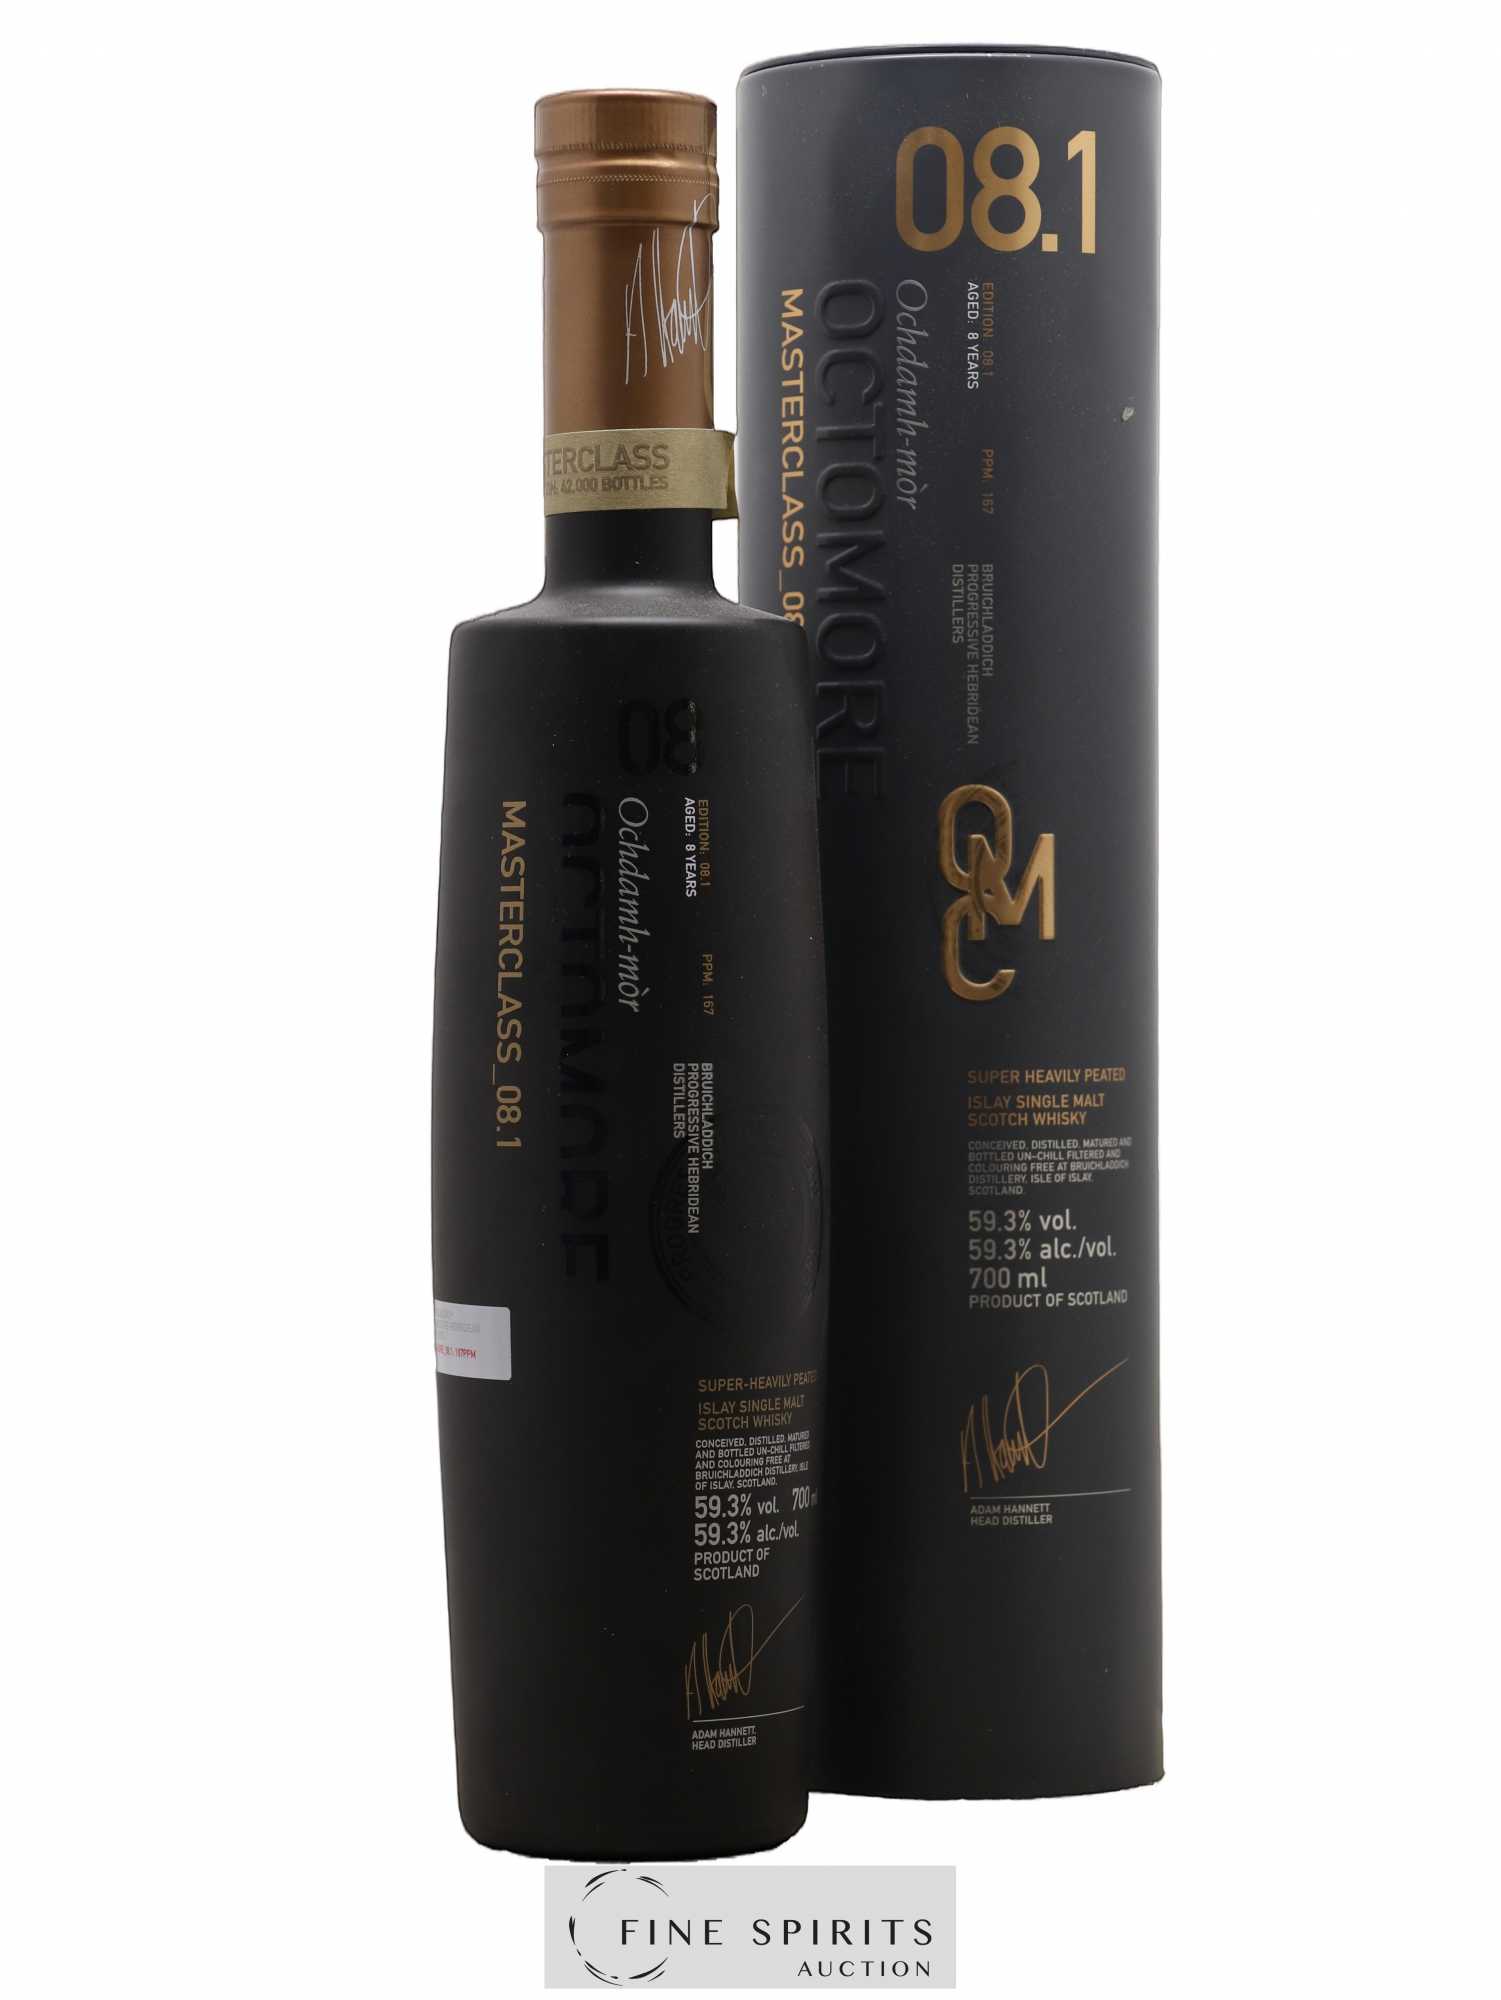 Octomore 8 years Of. Masterclass Edition 08.1 Super-Heavily Peated - One of 42000 Limited Edition 